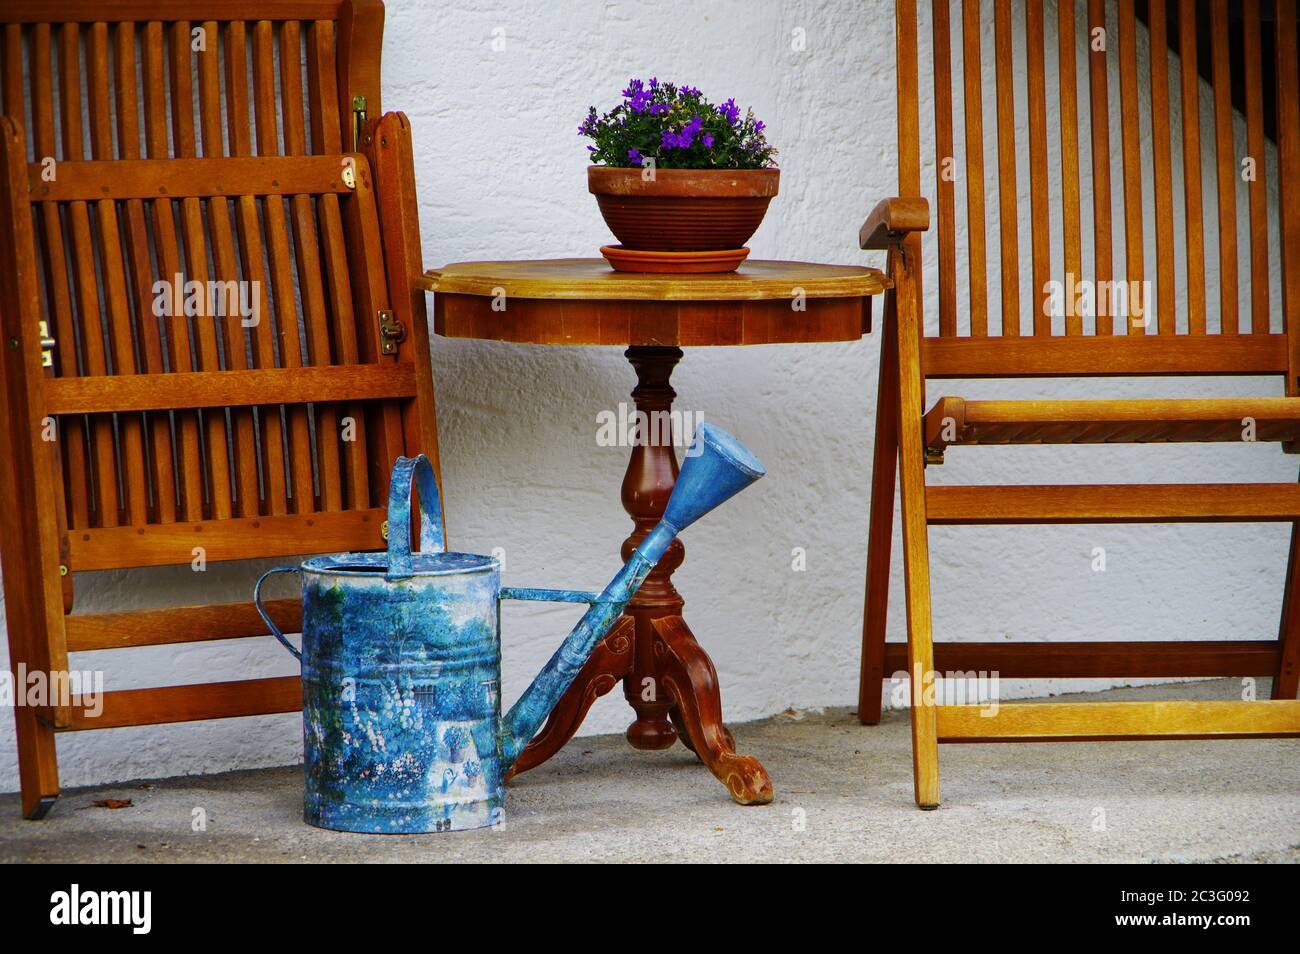 Folded wooden chairs on a terrace with a round table and blue watering can Stock Photo